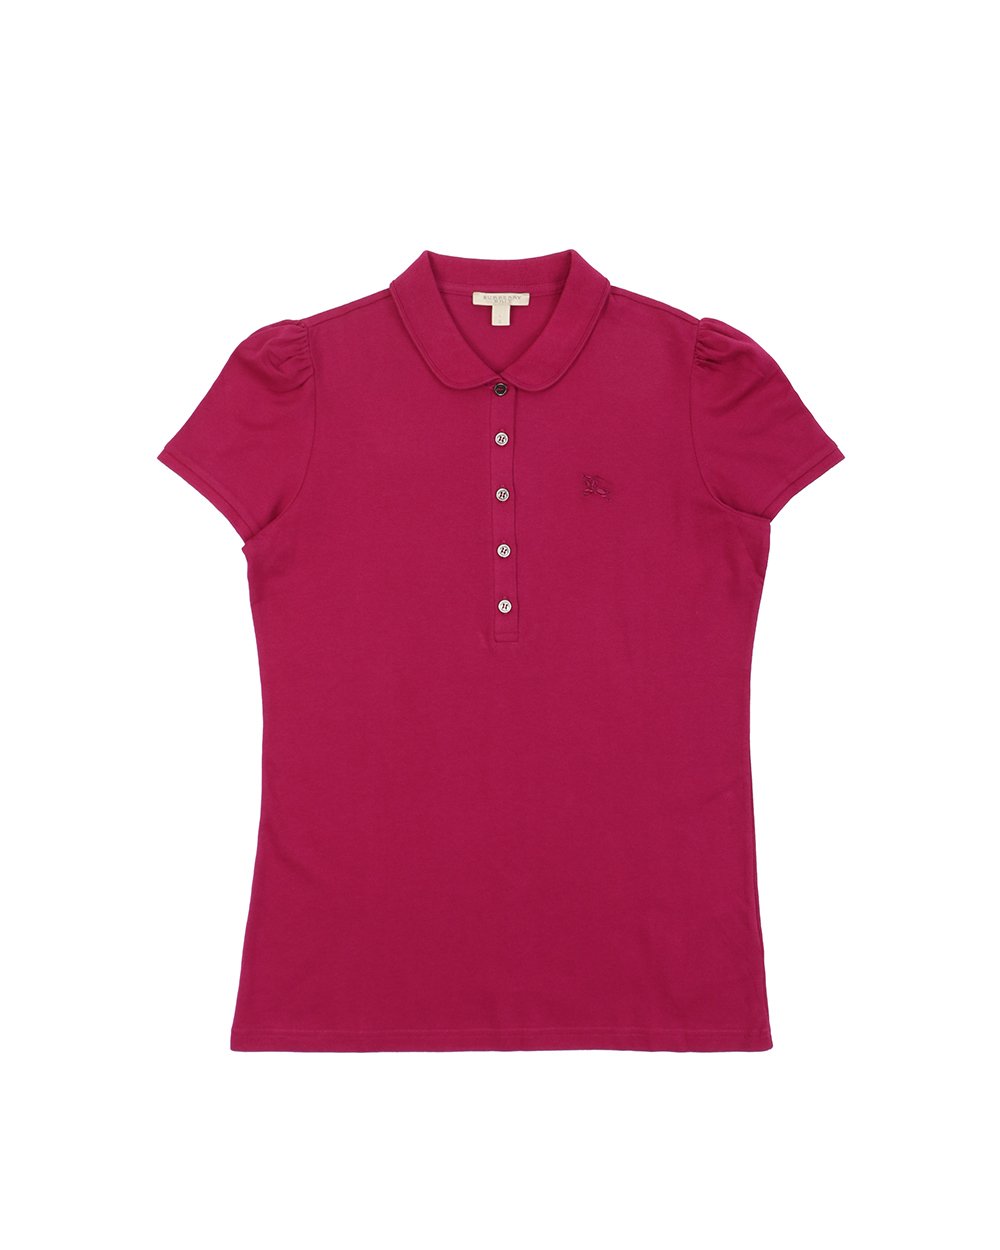 Cotton POLO shirt - ISSI Outlet